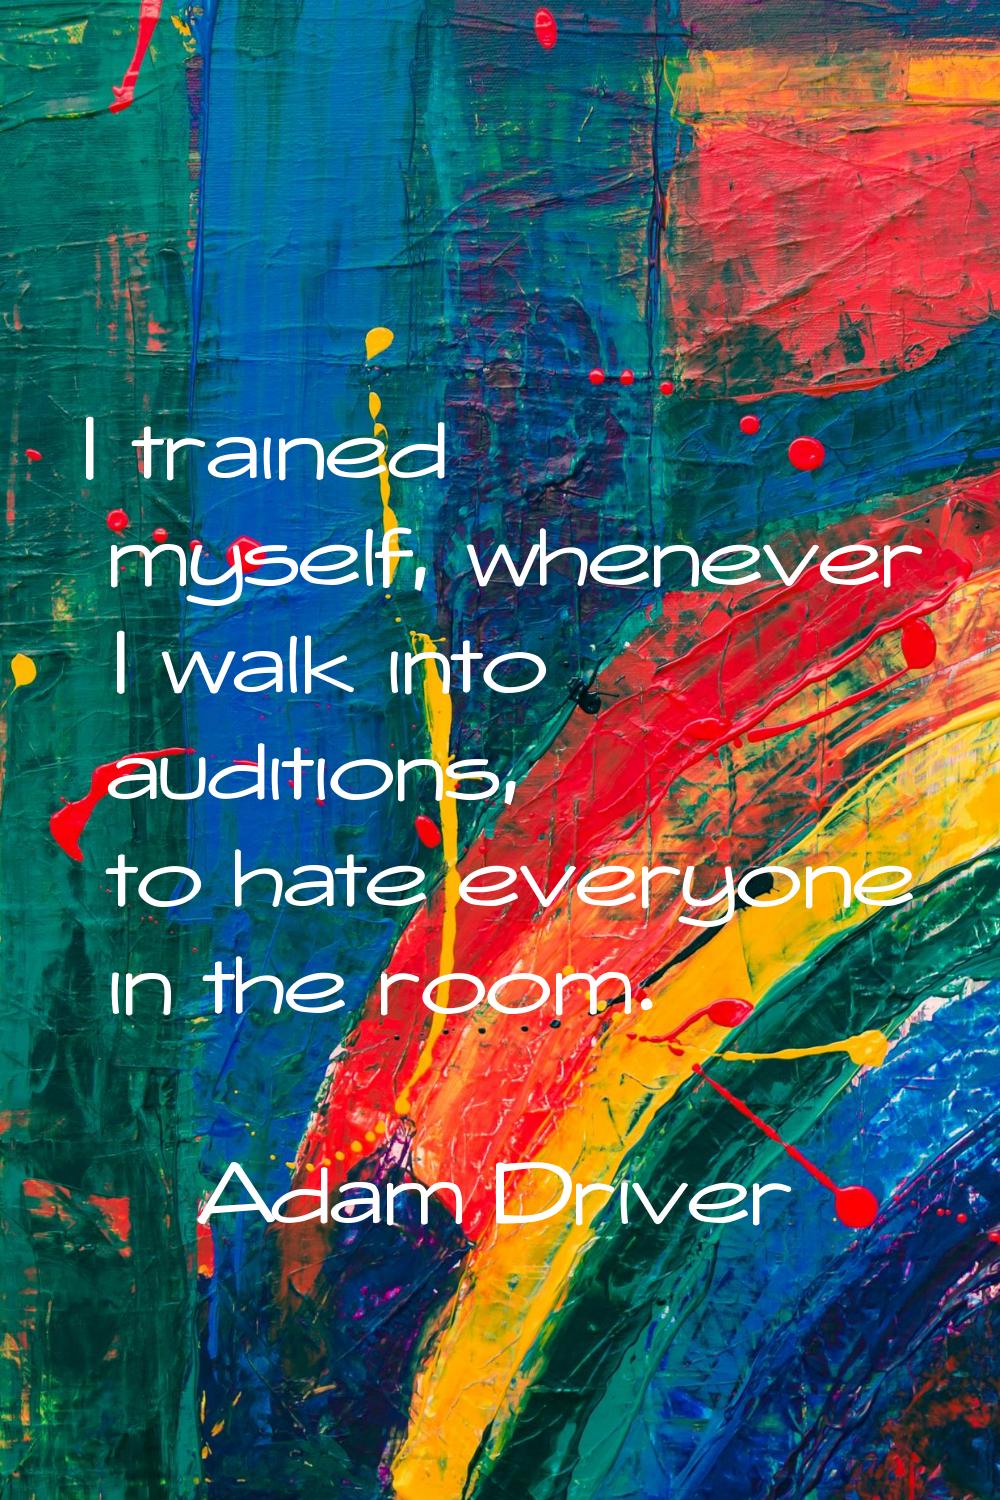 I trained myself, whenever I walk into auditions, to hate everyone in the room.